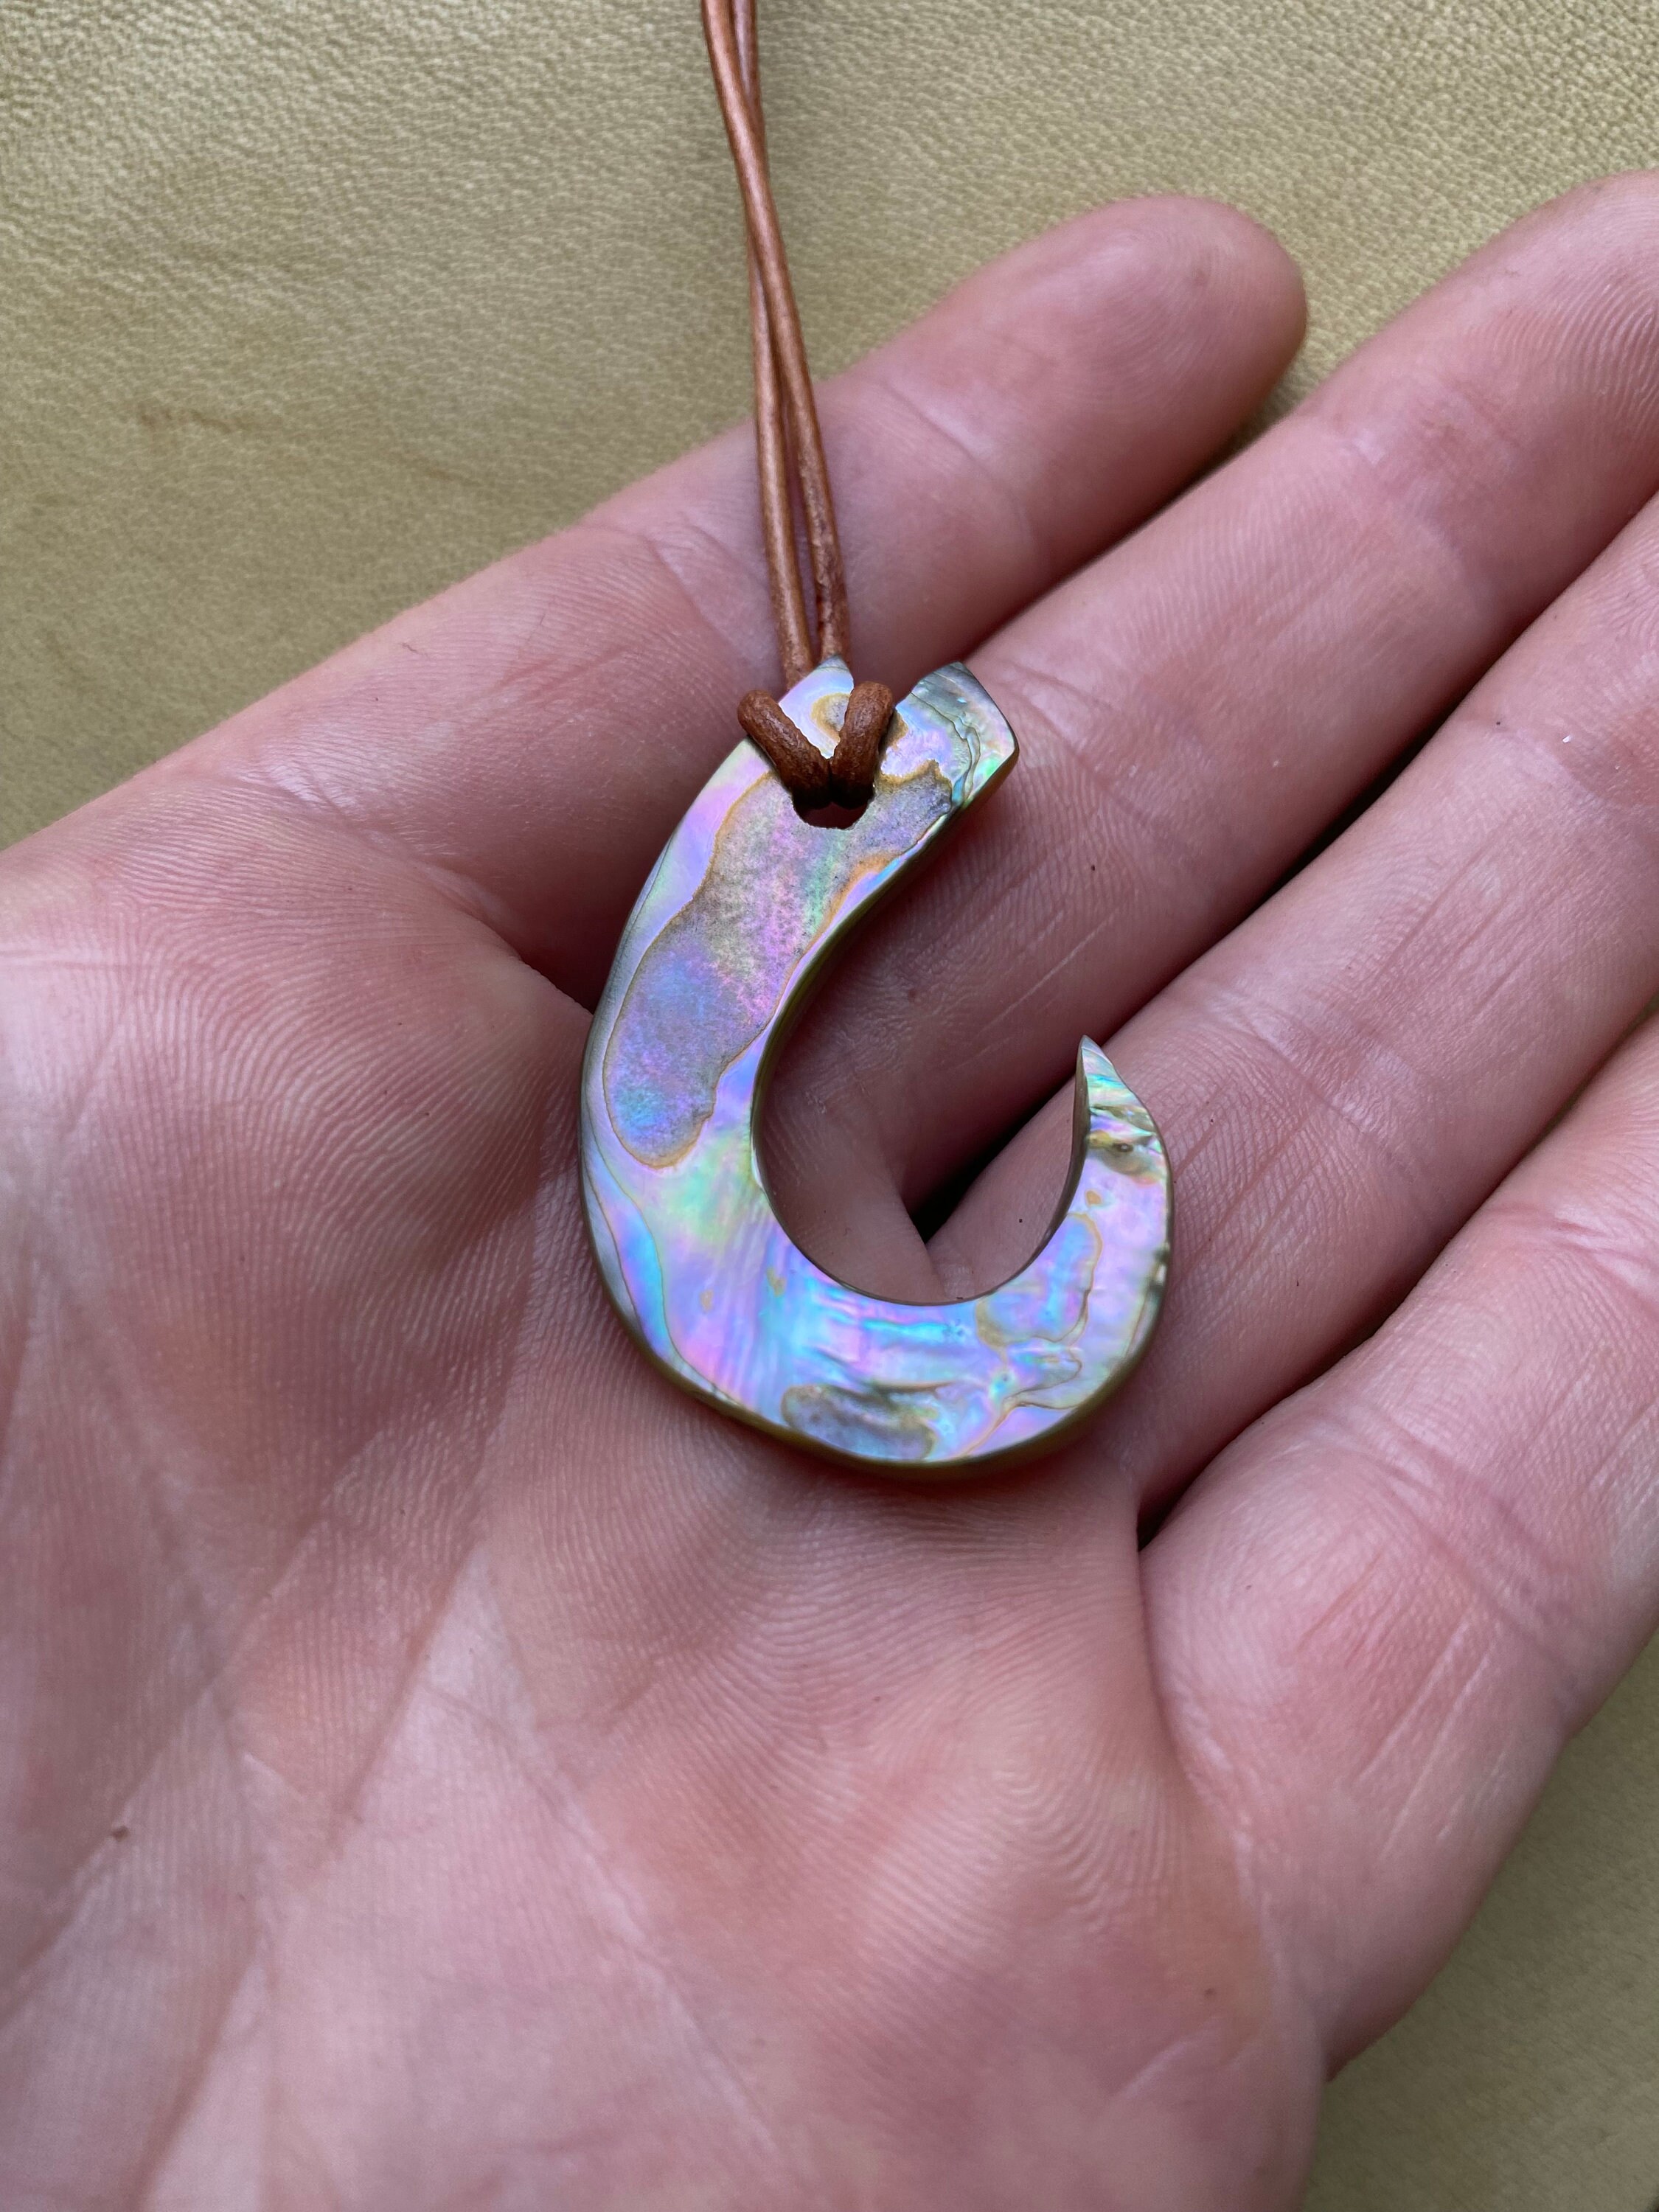 Red Abalone Hook Pendant by Chumash Artist Steven Saffold